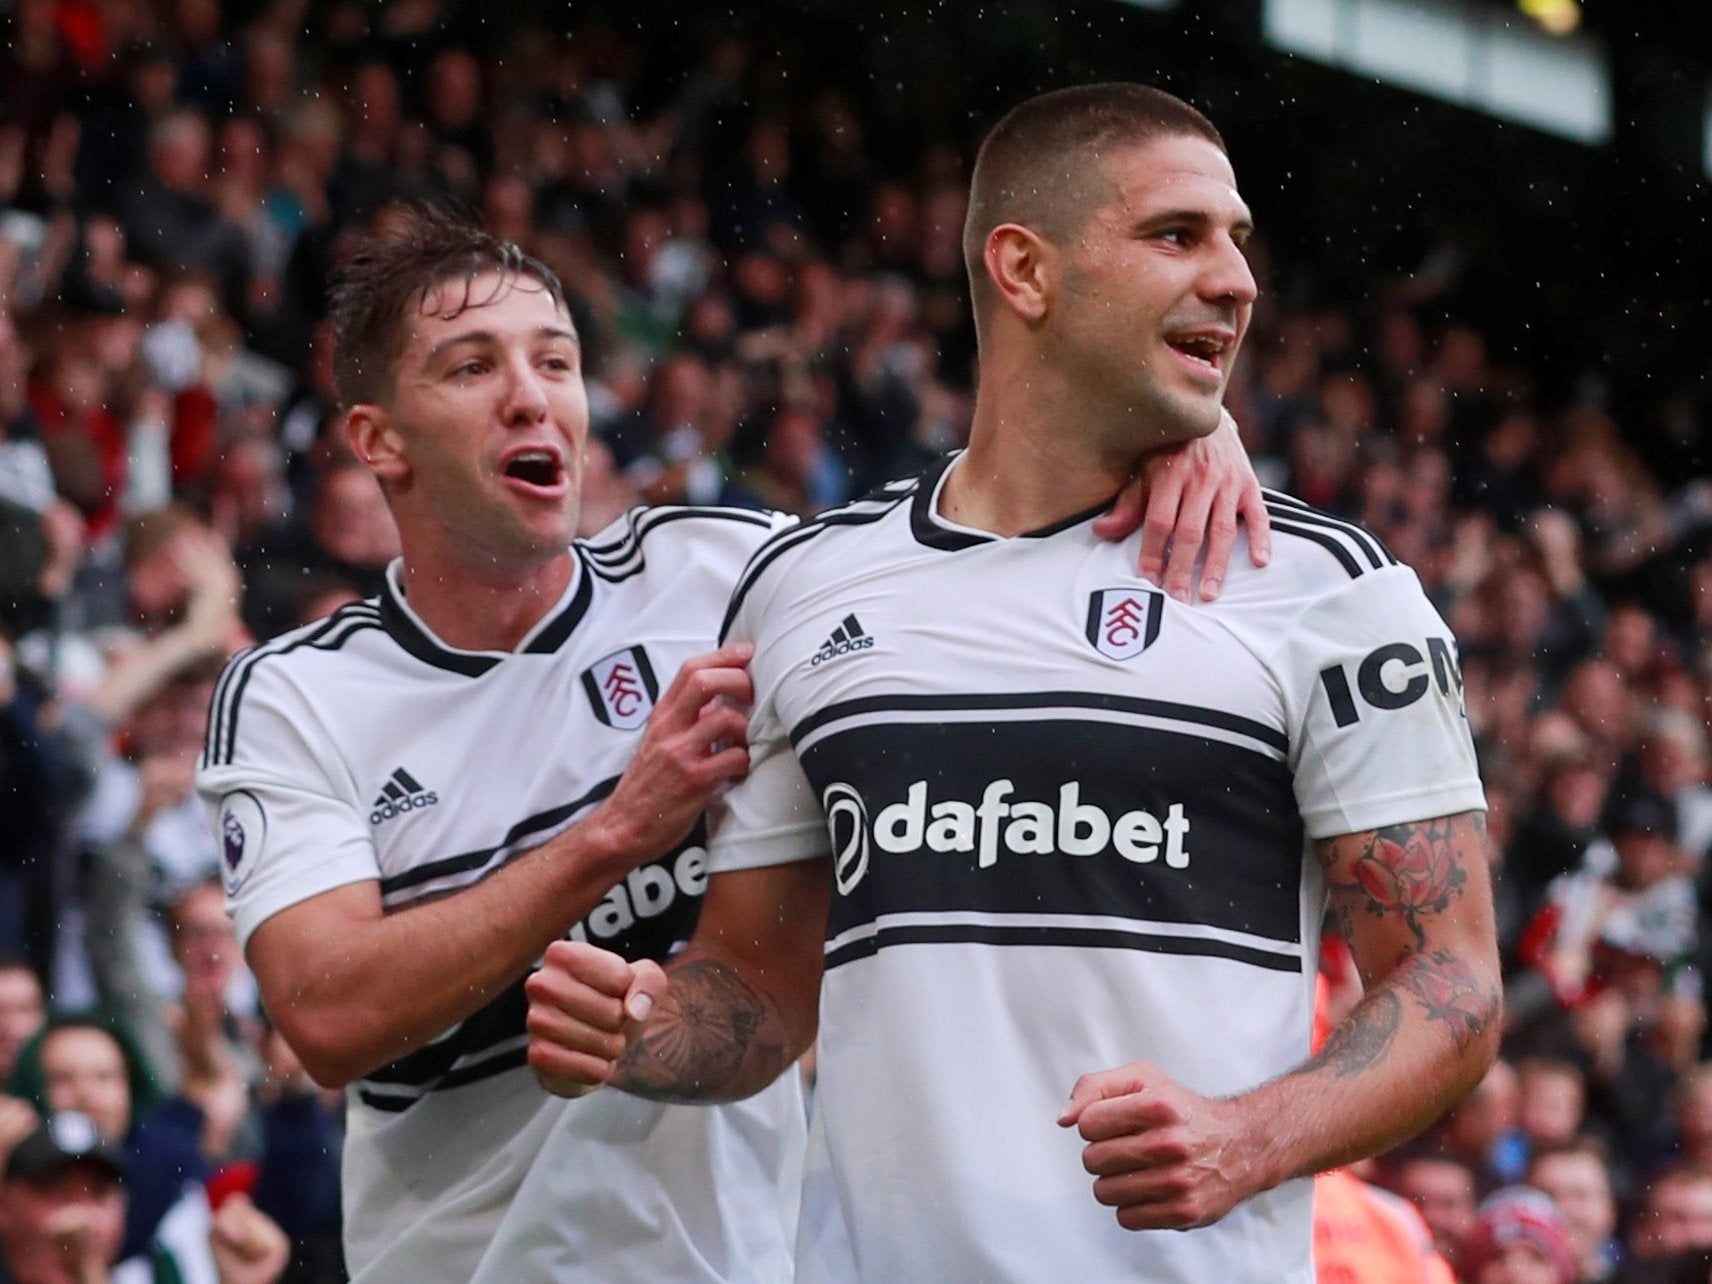 Fulham vs Burnley - LIVE: Latest score, goals and updates plus prediction, how to watch online, team news, line-ups, head-to-head, betting odds and more